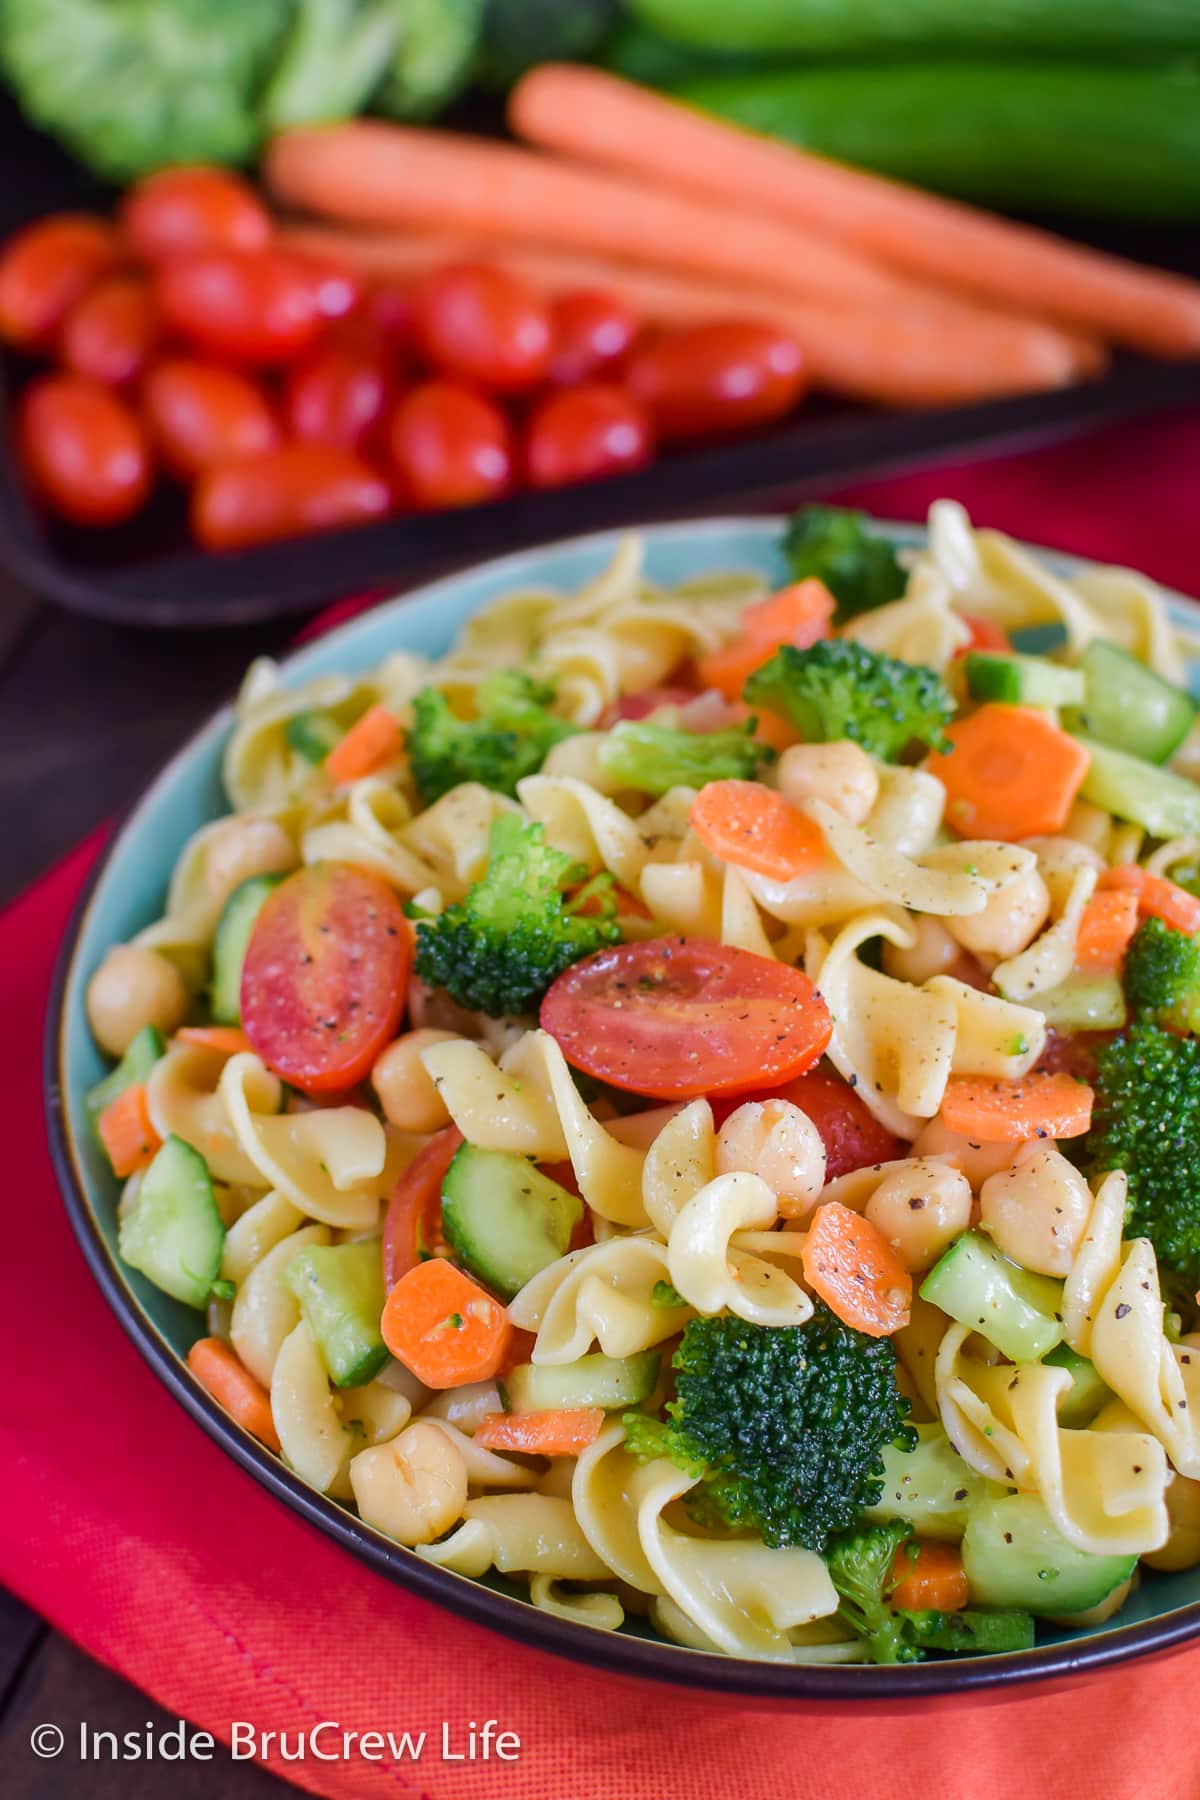 A large bowl filled with egg noodles and veggies.